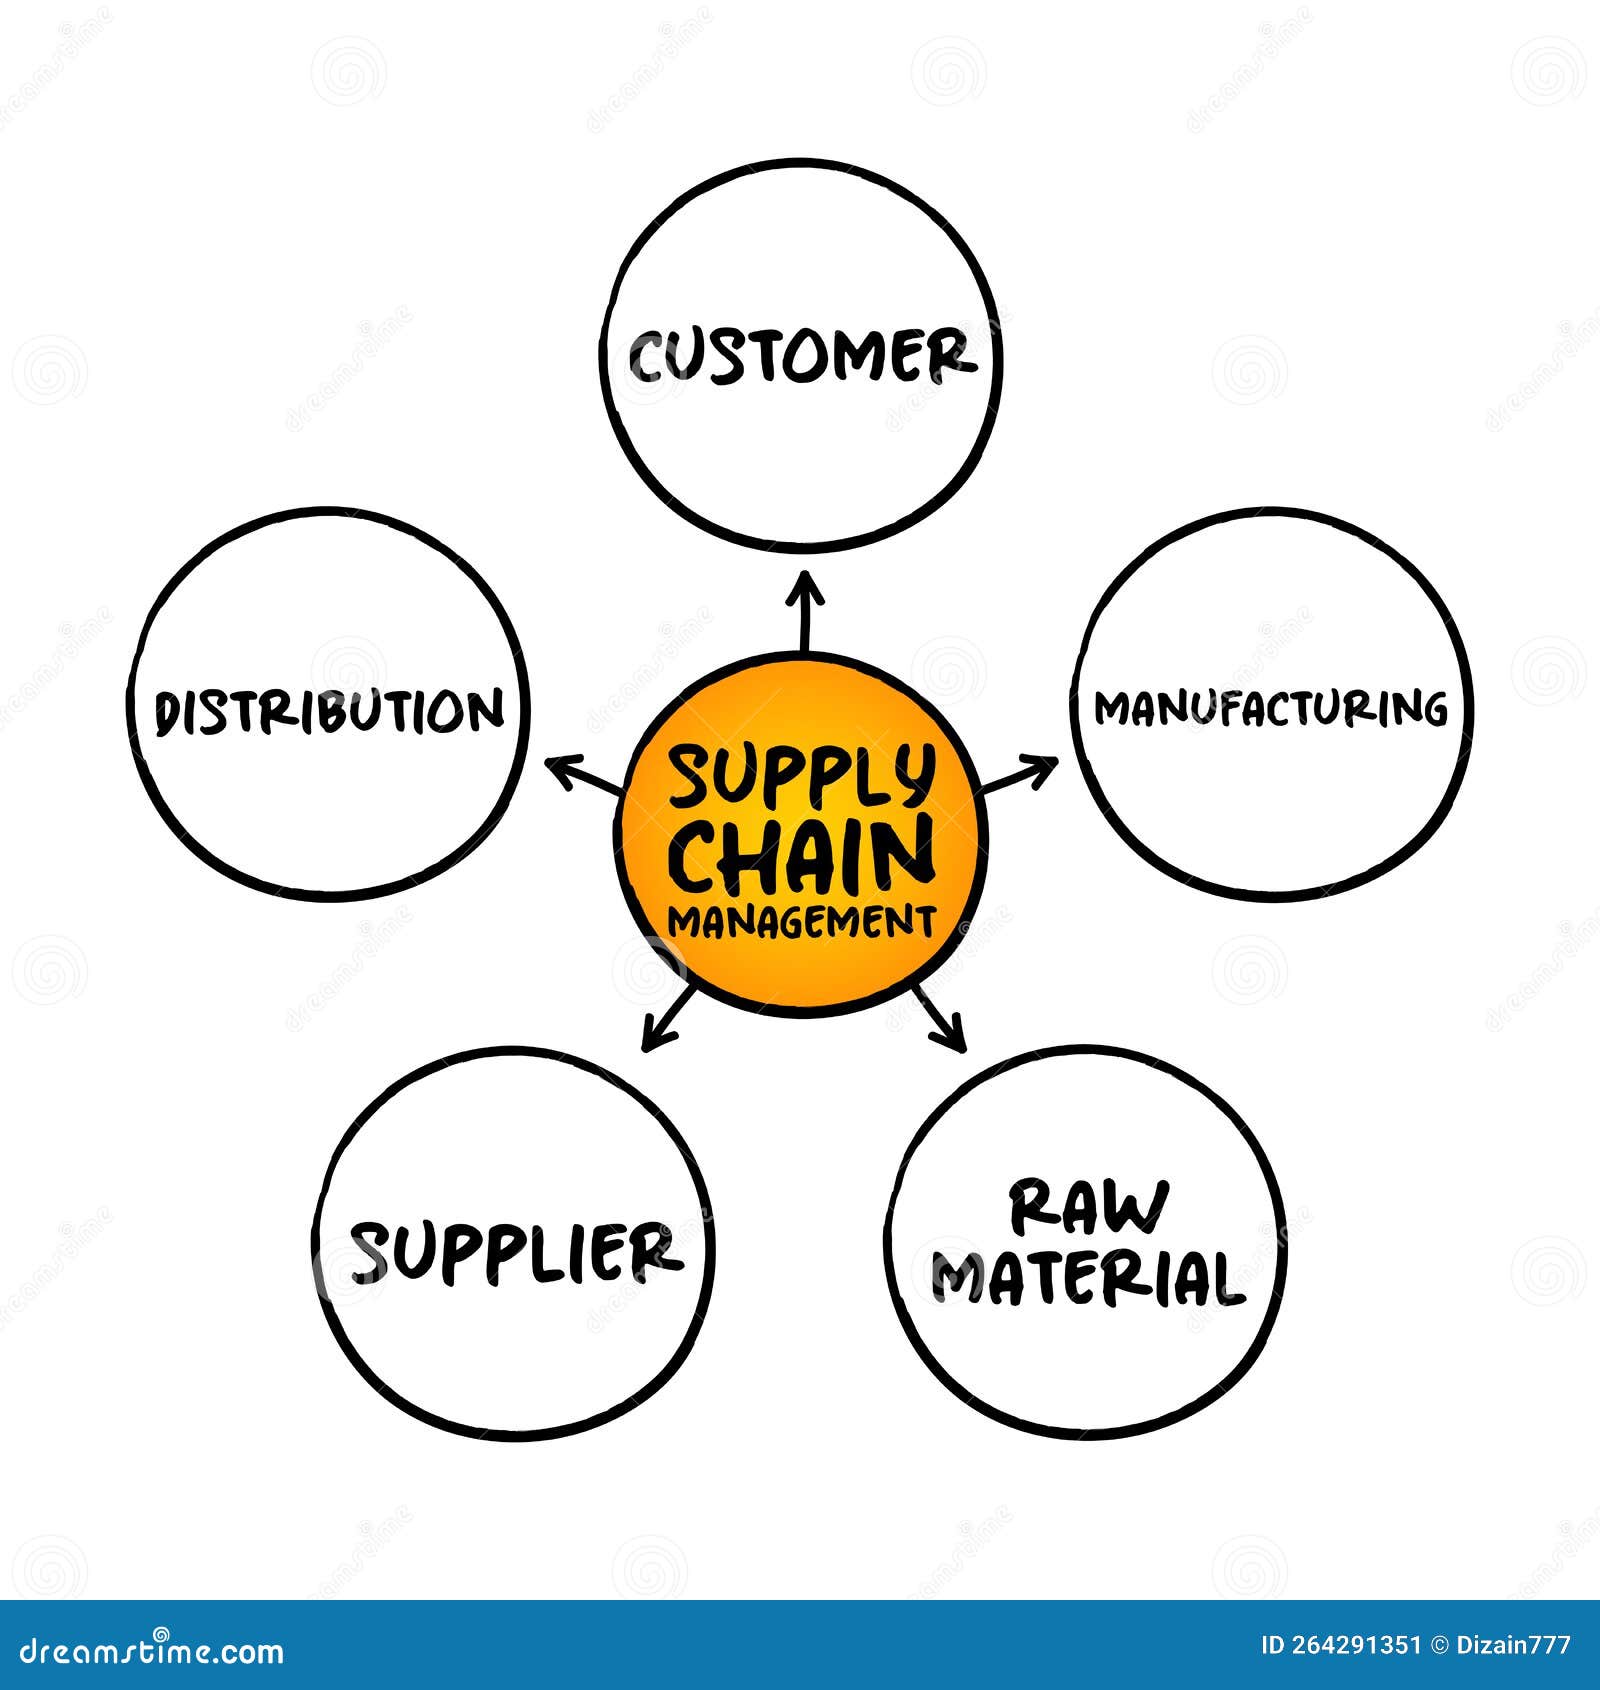 Scm Supply Chain Management The Management Of The Flow Of Goods And